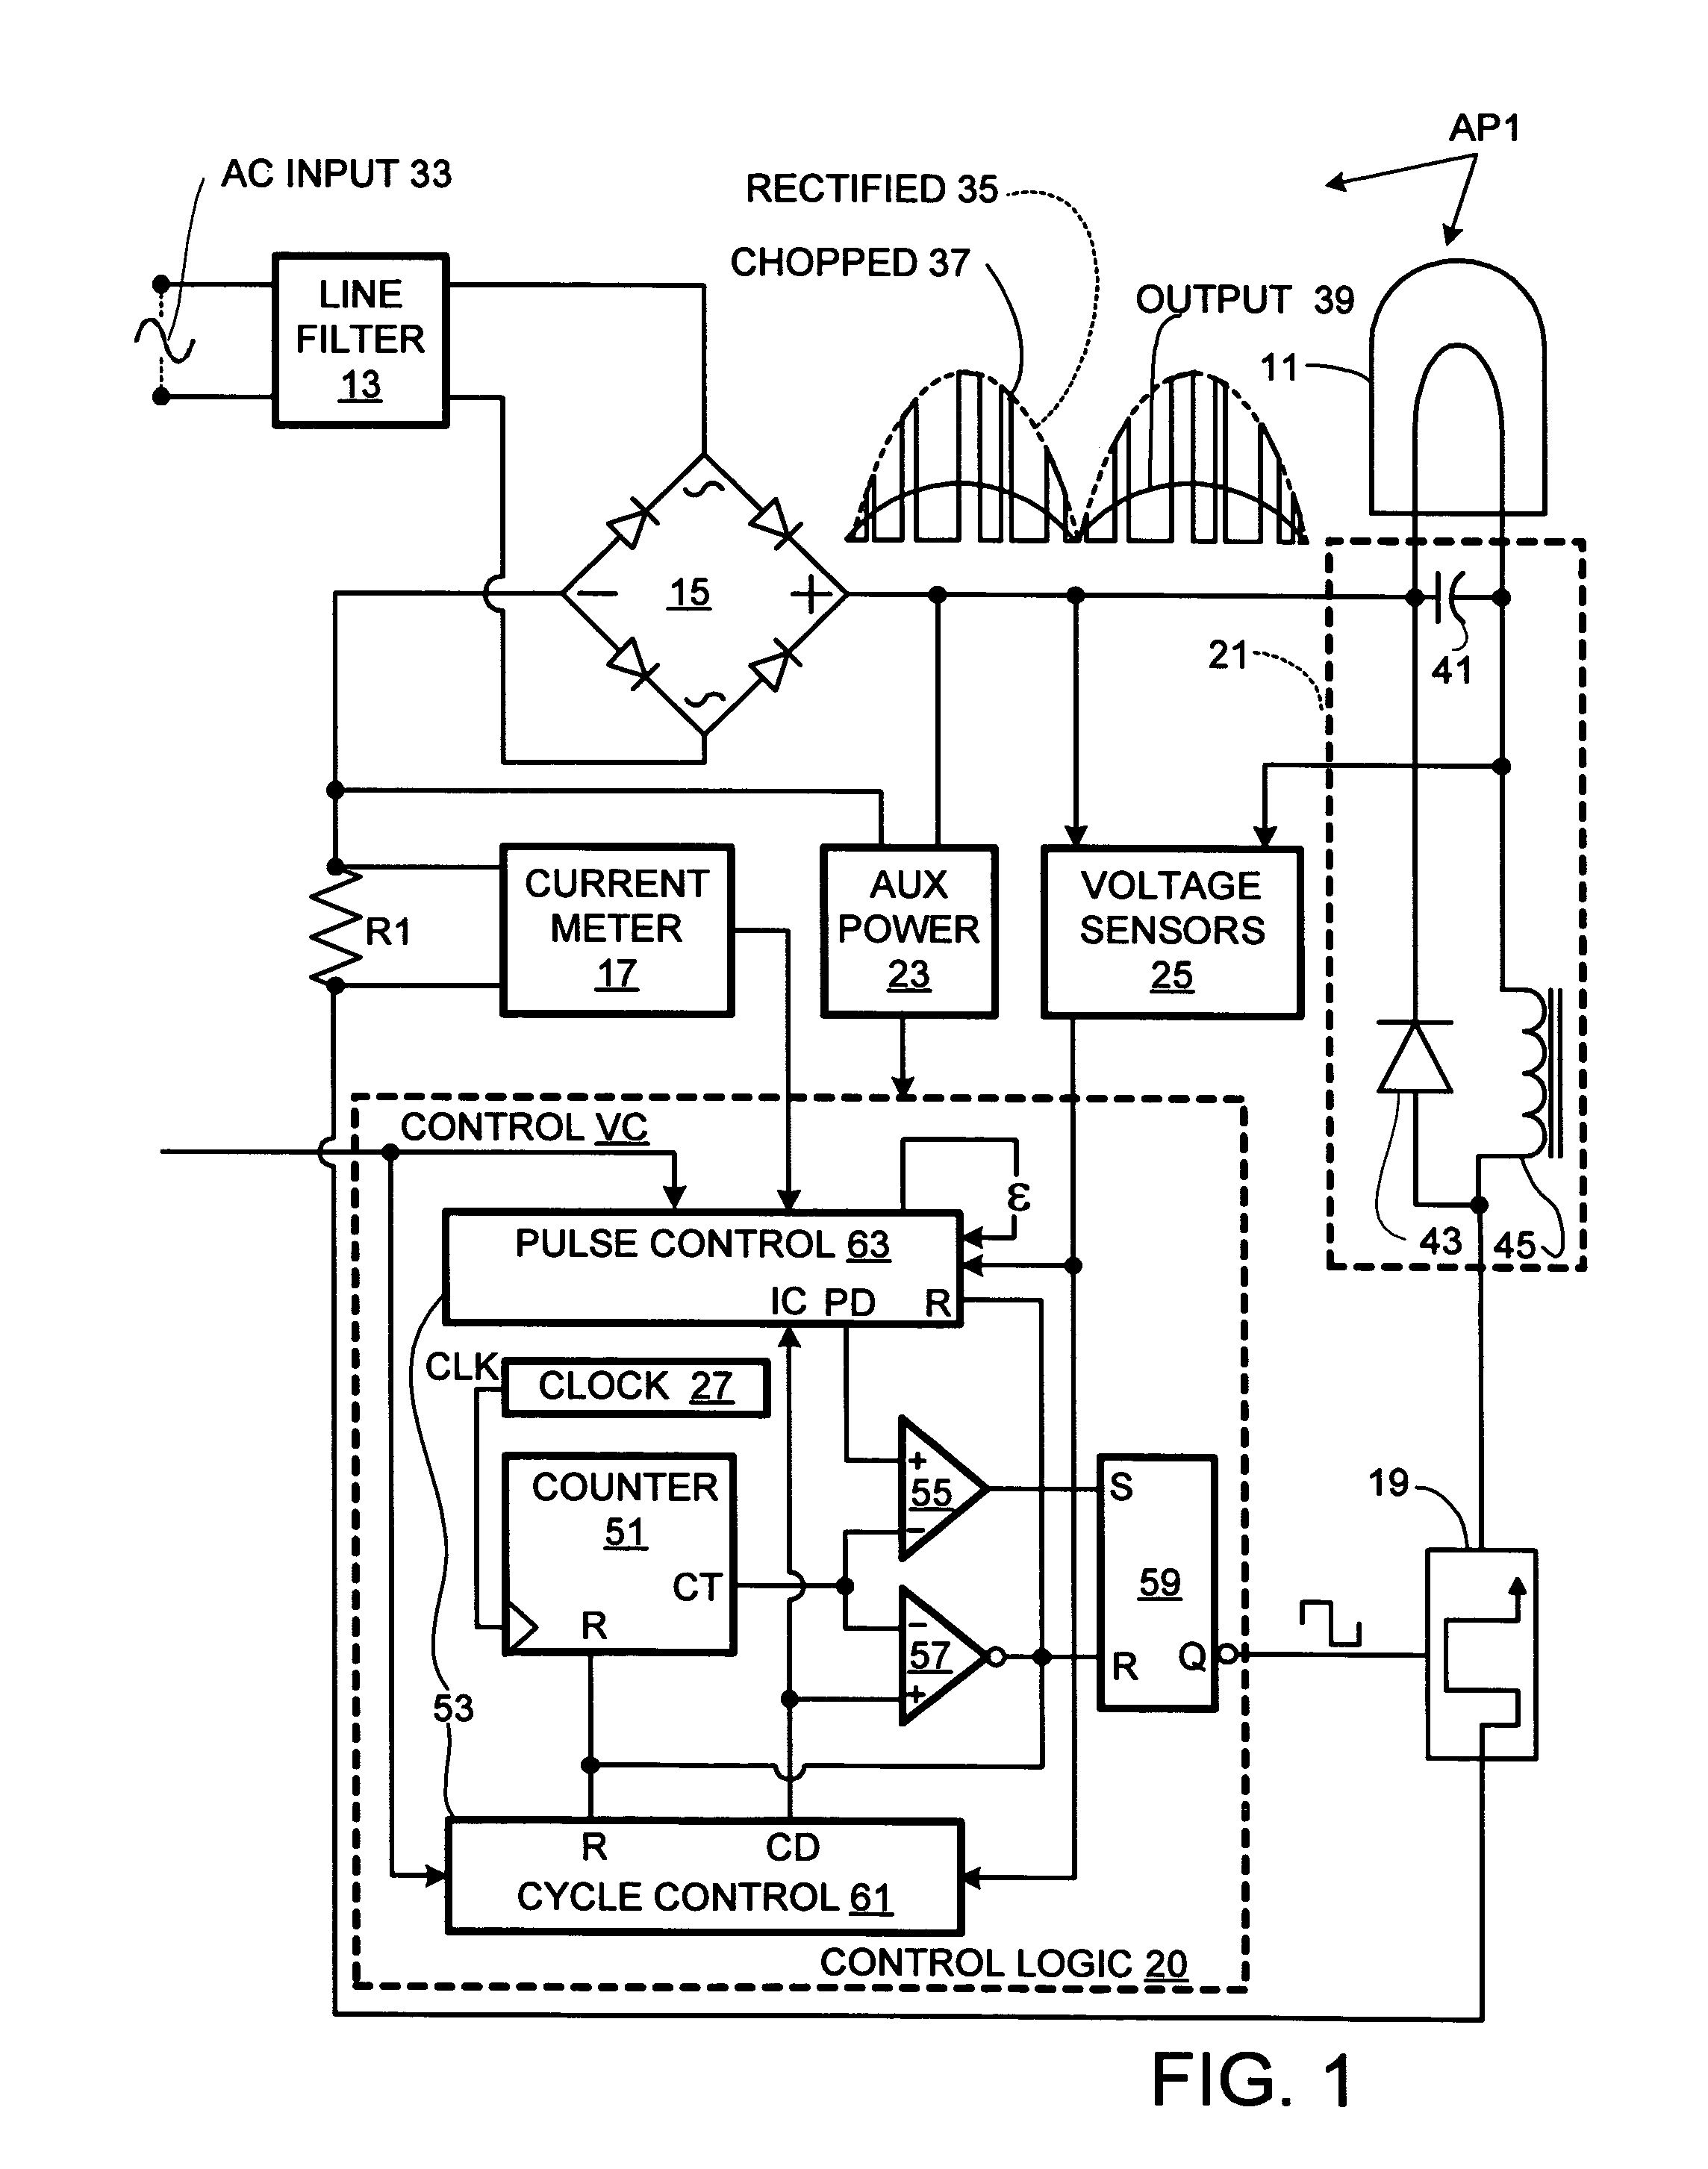 Spread spectrum power converter with duty-cycle error compensation